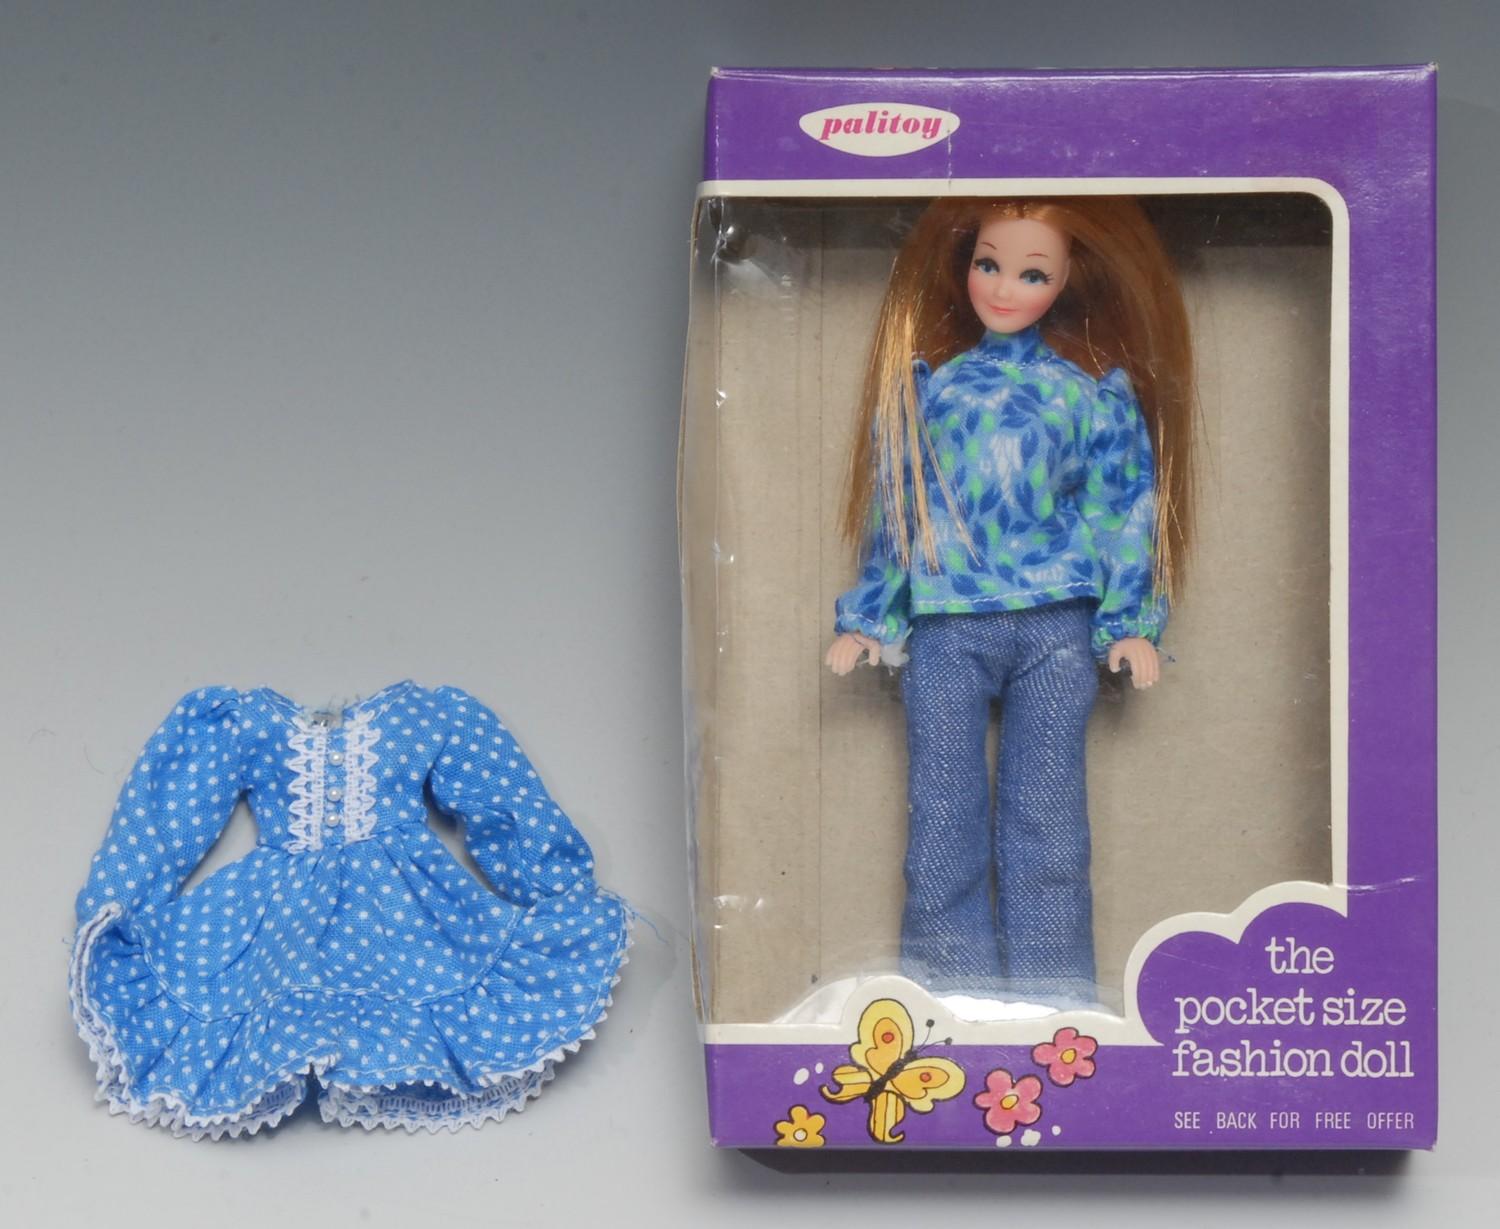 Palitoy Pippa's friend Tammie pocket size fashion doll, red hair, wearing a blue blouse with printed